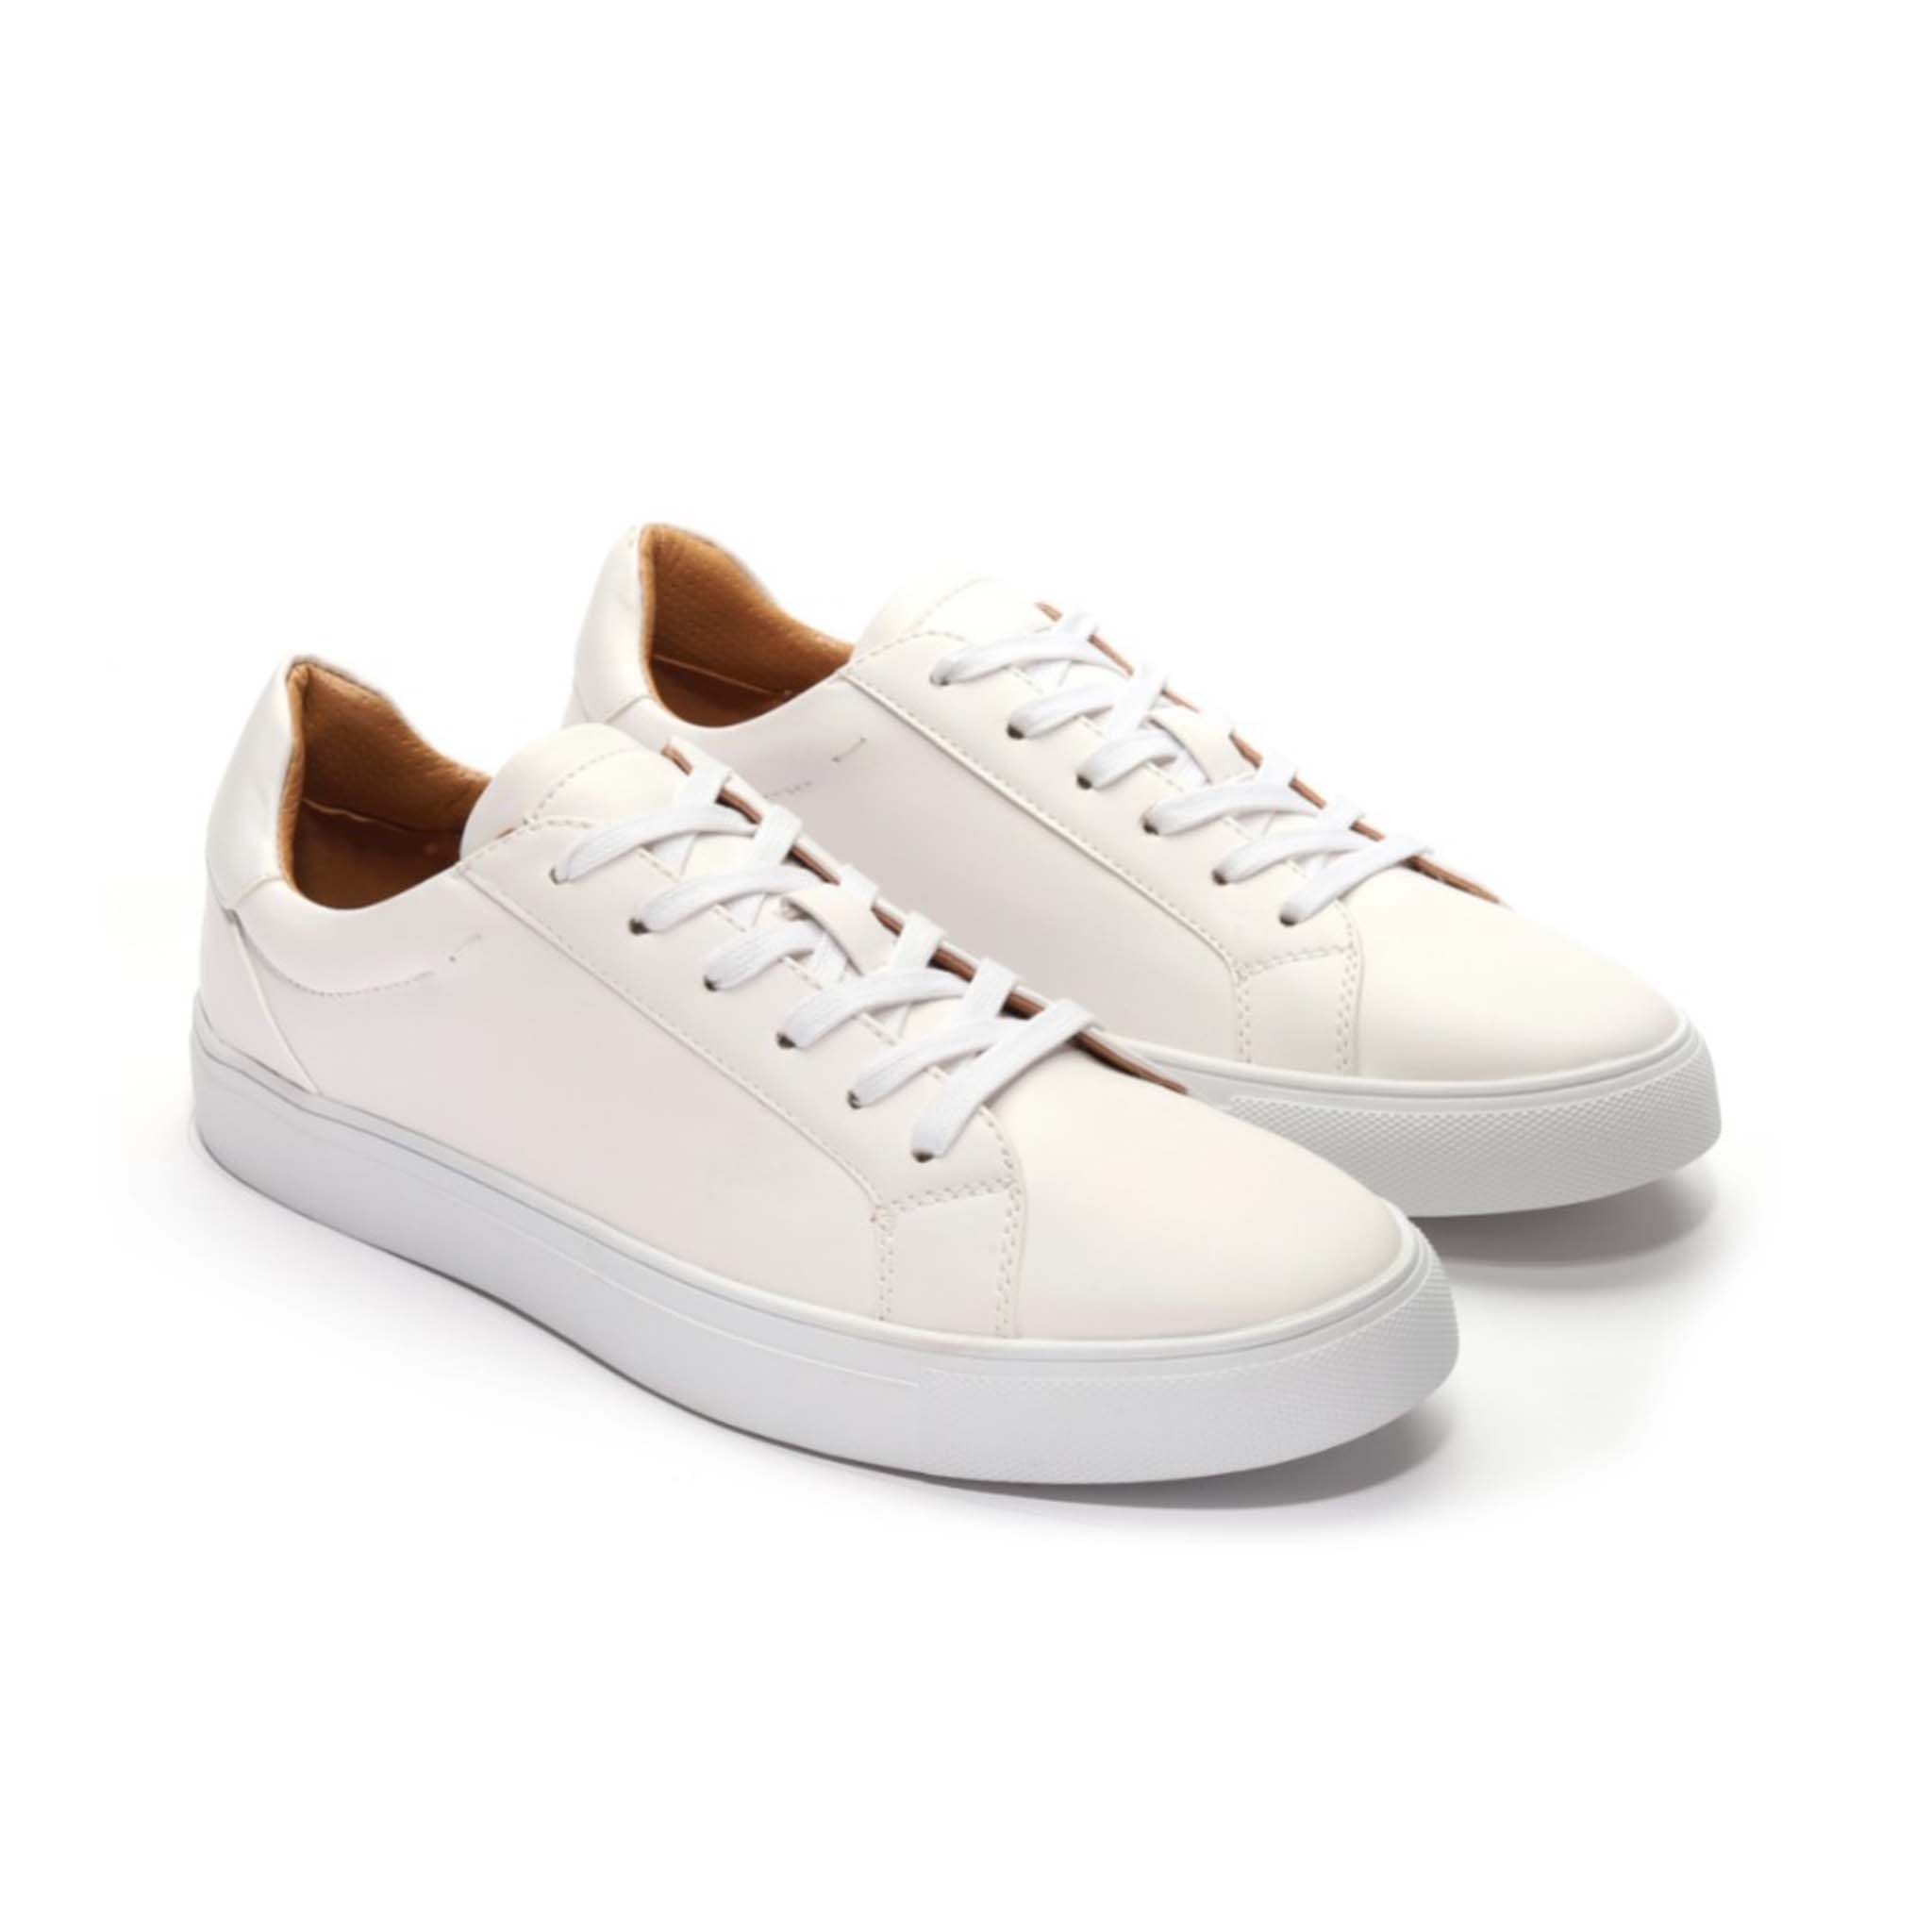 Men's white casual sneaker D&K Suit Discounters - high-quality materials for comfort and durability